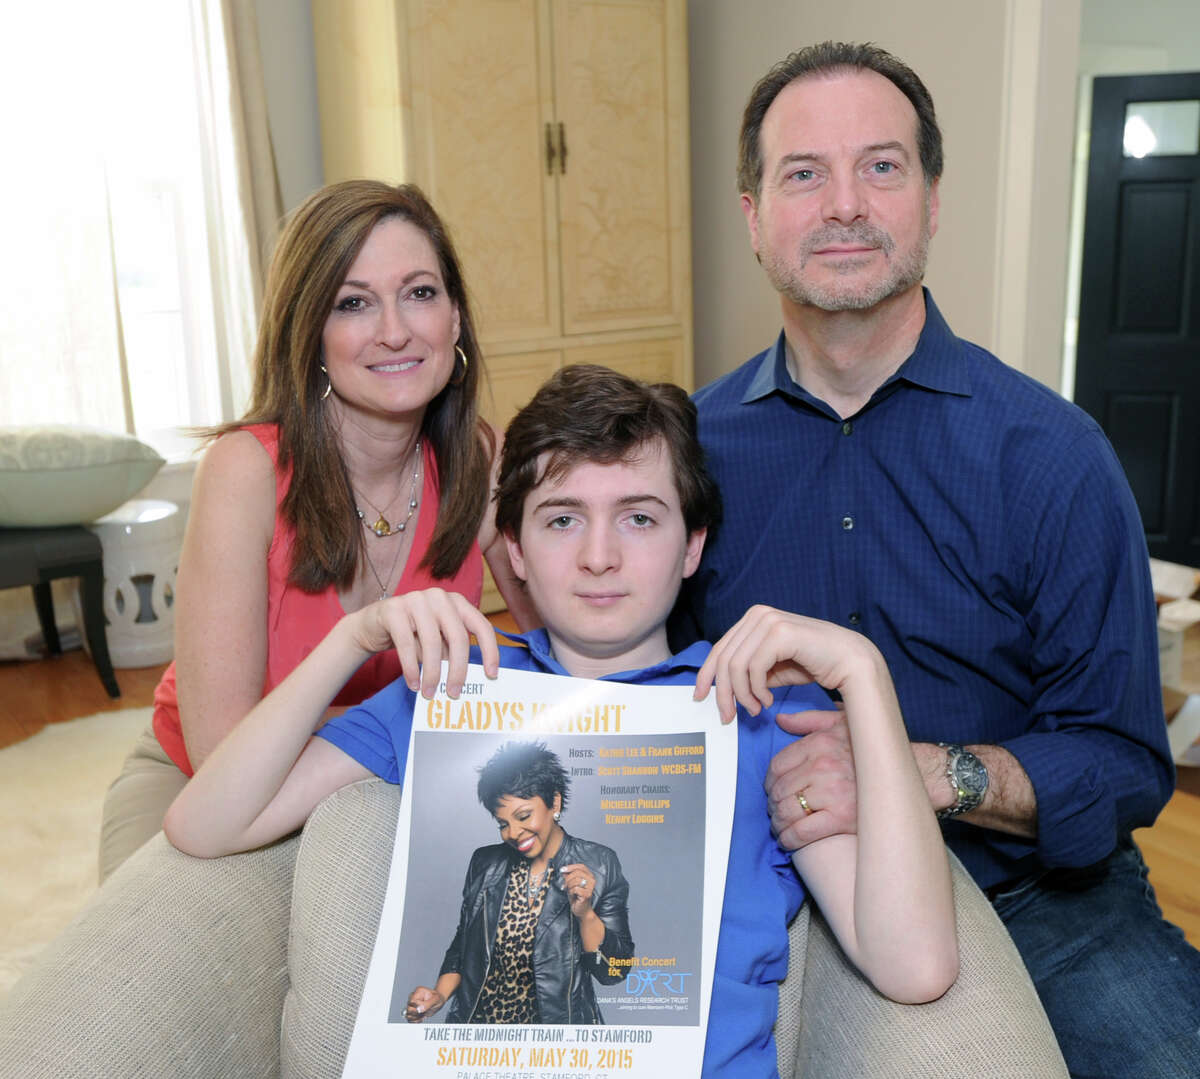 Phil and Andrea Marella with their son, Andrew Marella, 15, holding a Gladys Knight poster at their Greenwich home, Friday, May 8, 2015. Andrew Marella suffers from Niemann-Pick Type C, a genetic disease that is a neurodegenerative disorder which causes progressive deterioration of the nervous system. The family who also lost a daughter, Dana, to the disorder, is spearheading a benefit gala featuring Kinght at the Palace Theatre in Stamford on Saturday, May 30, to raise money and awareness for medical research of Niemann-Pick Type C.